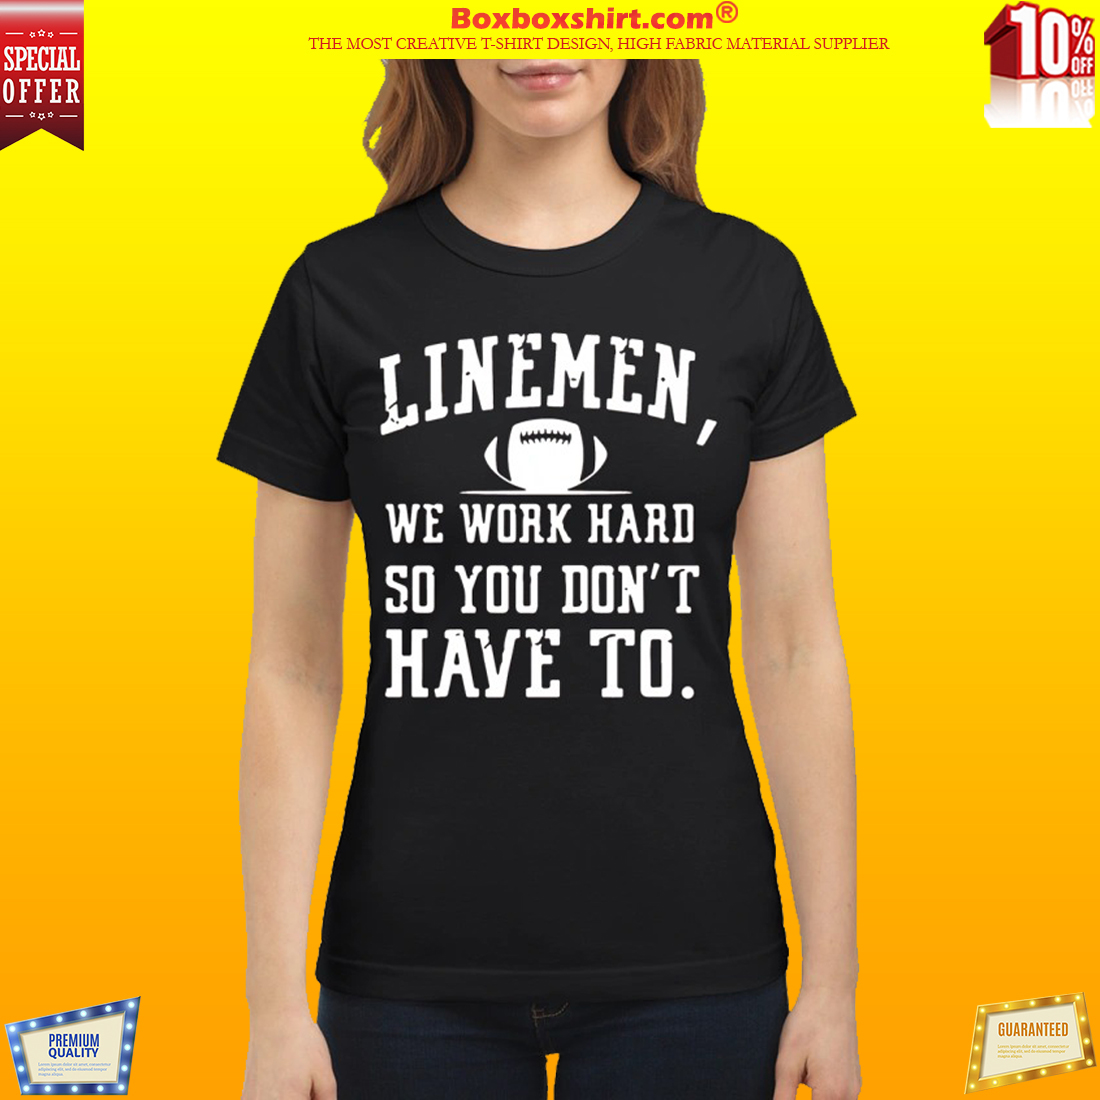 Linemen we work hard so you don't have to classic shirt